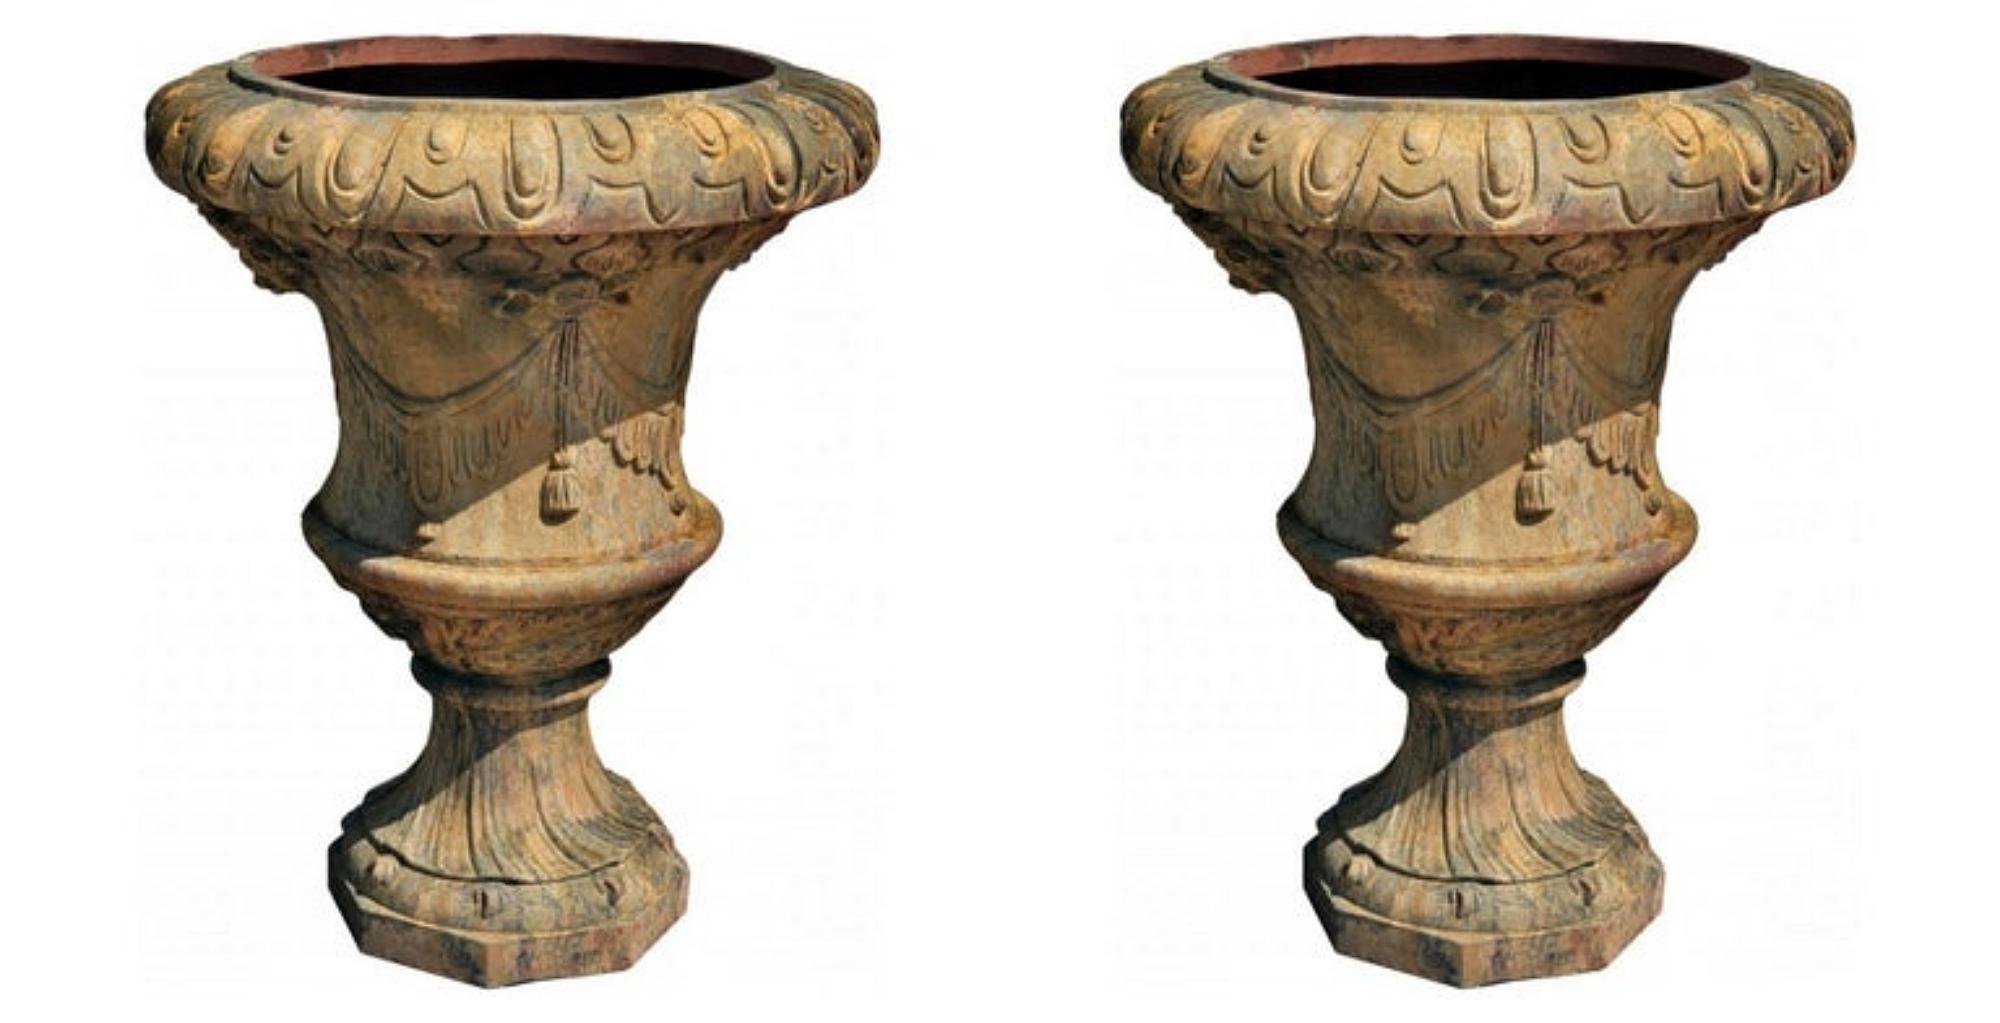 Italian Pair of Large Florentine Ornamental Vases in Terracotta Early 20th Century For Sale